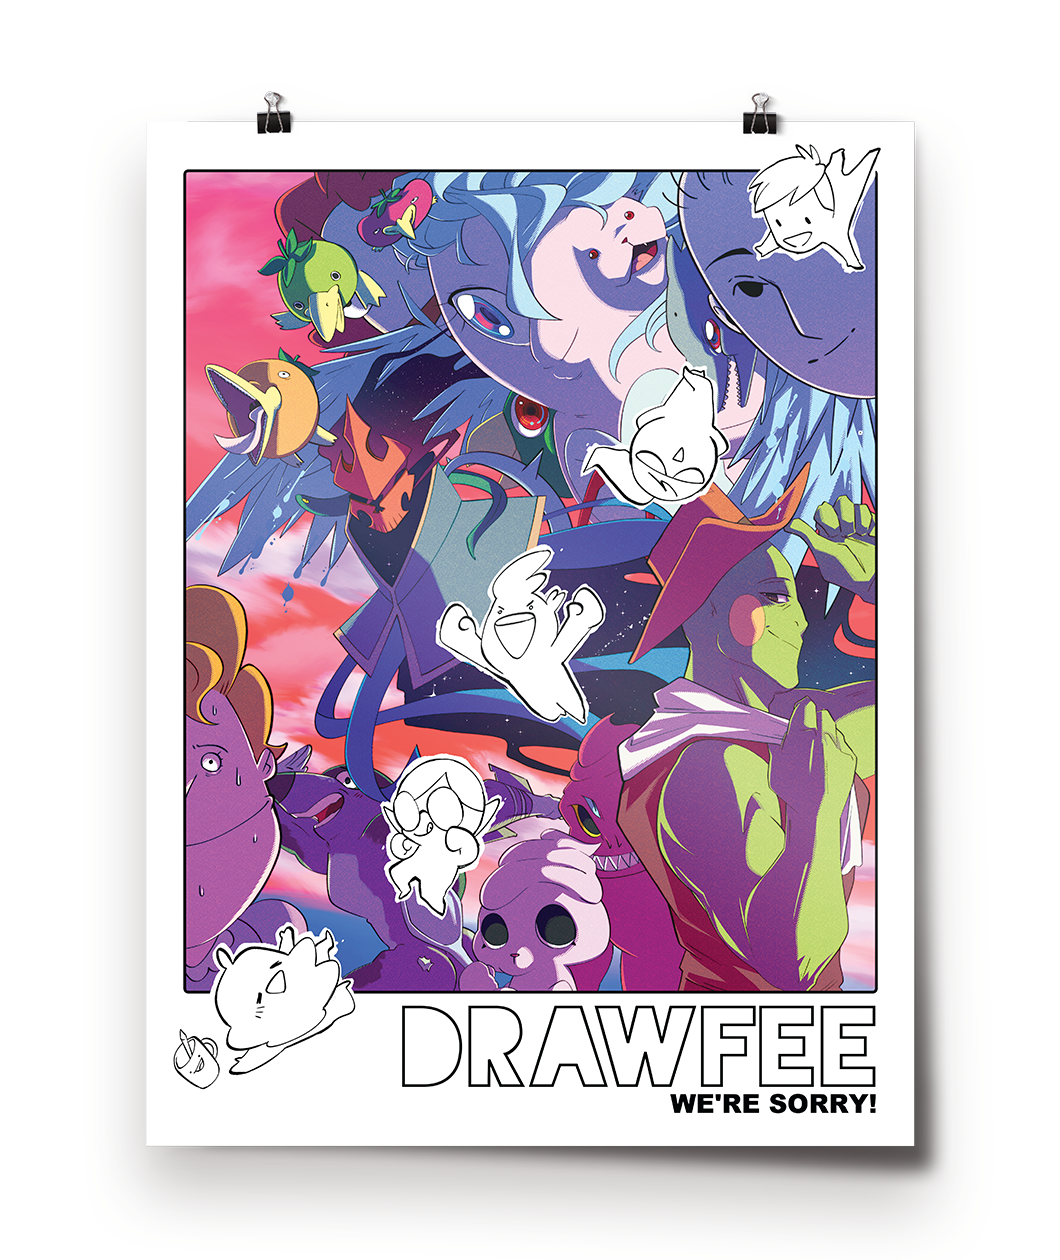 A vertical poster with colorful illustrations from Drawfee and block text that says 